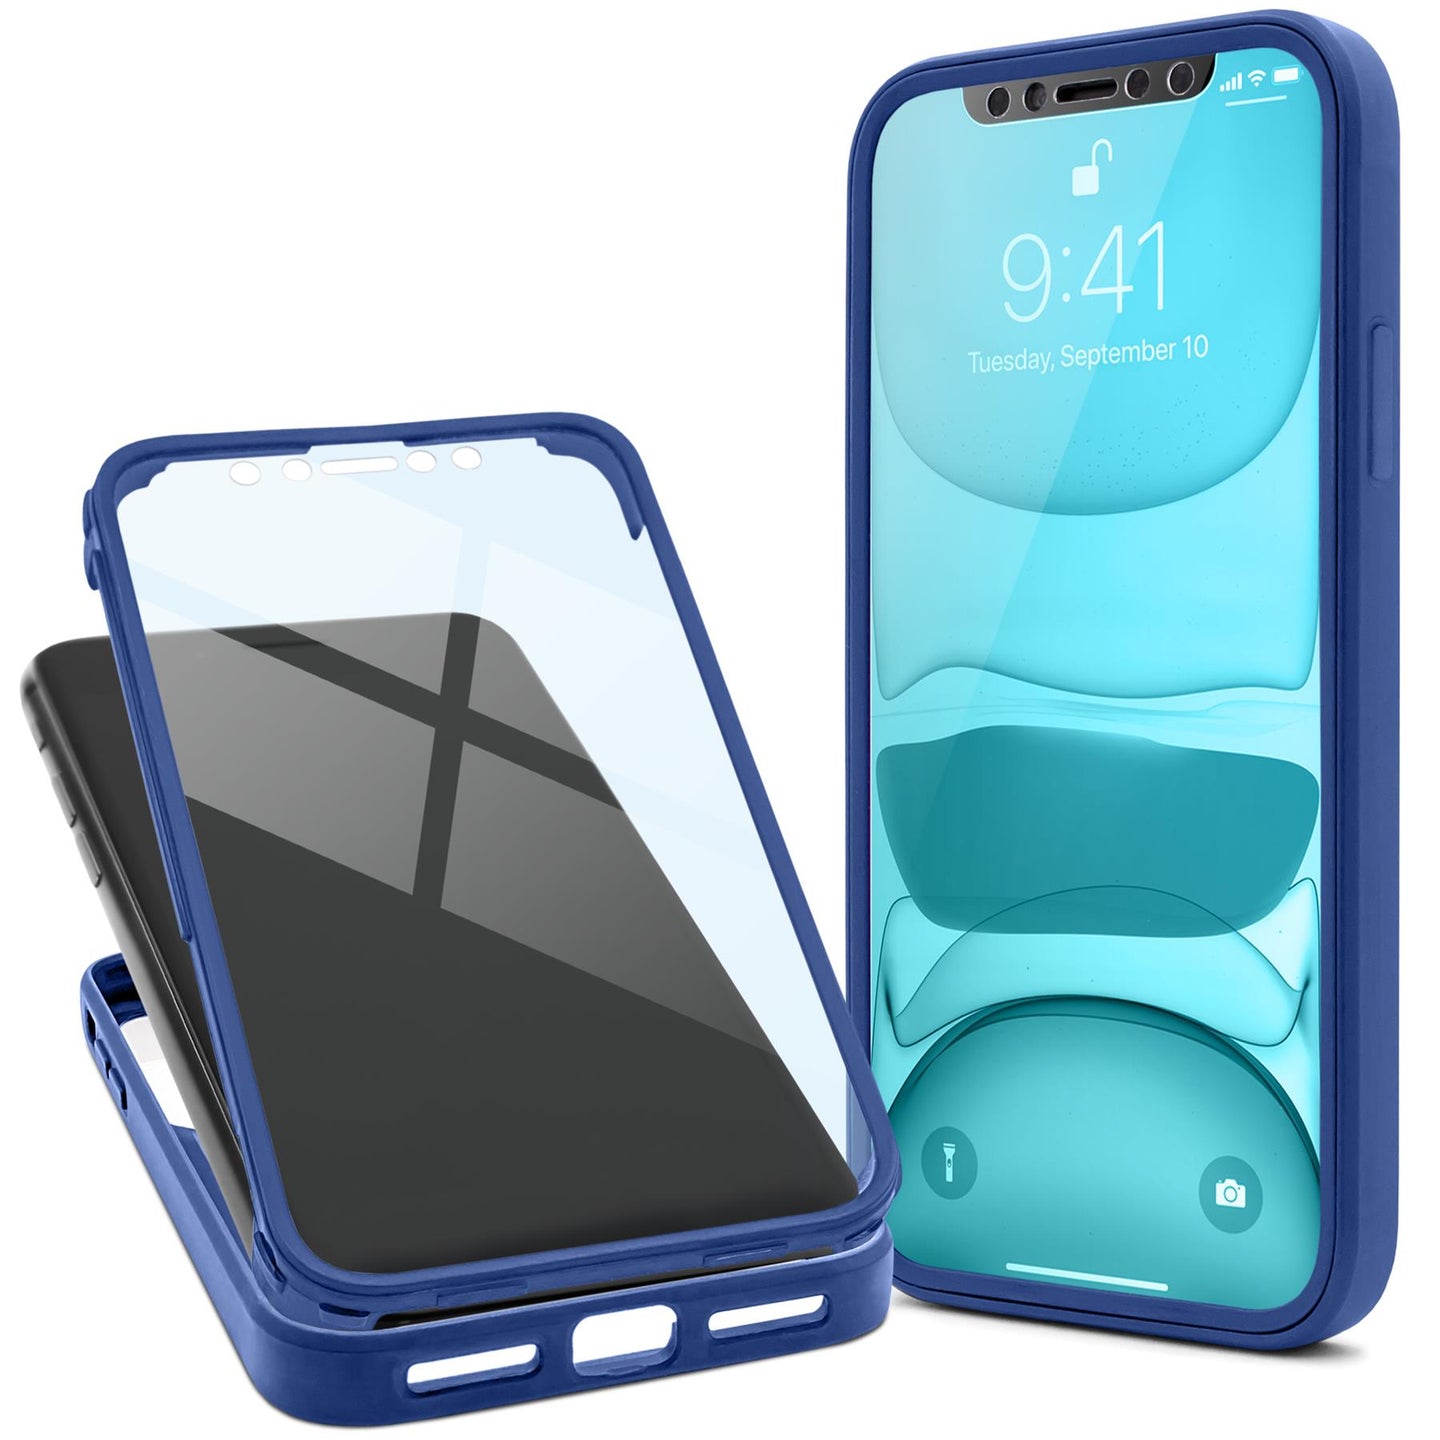 Moozy 360 Case for iPhone 11 - Blue Rim Transparent Case, Full Body Double-sided Protection, Cover with Built-in Screen Protector